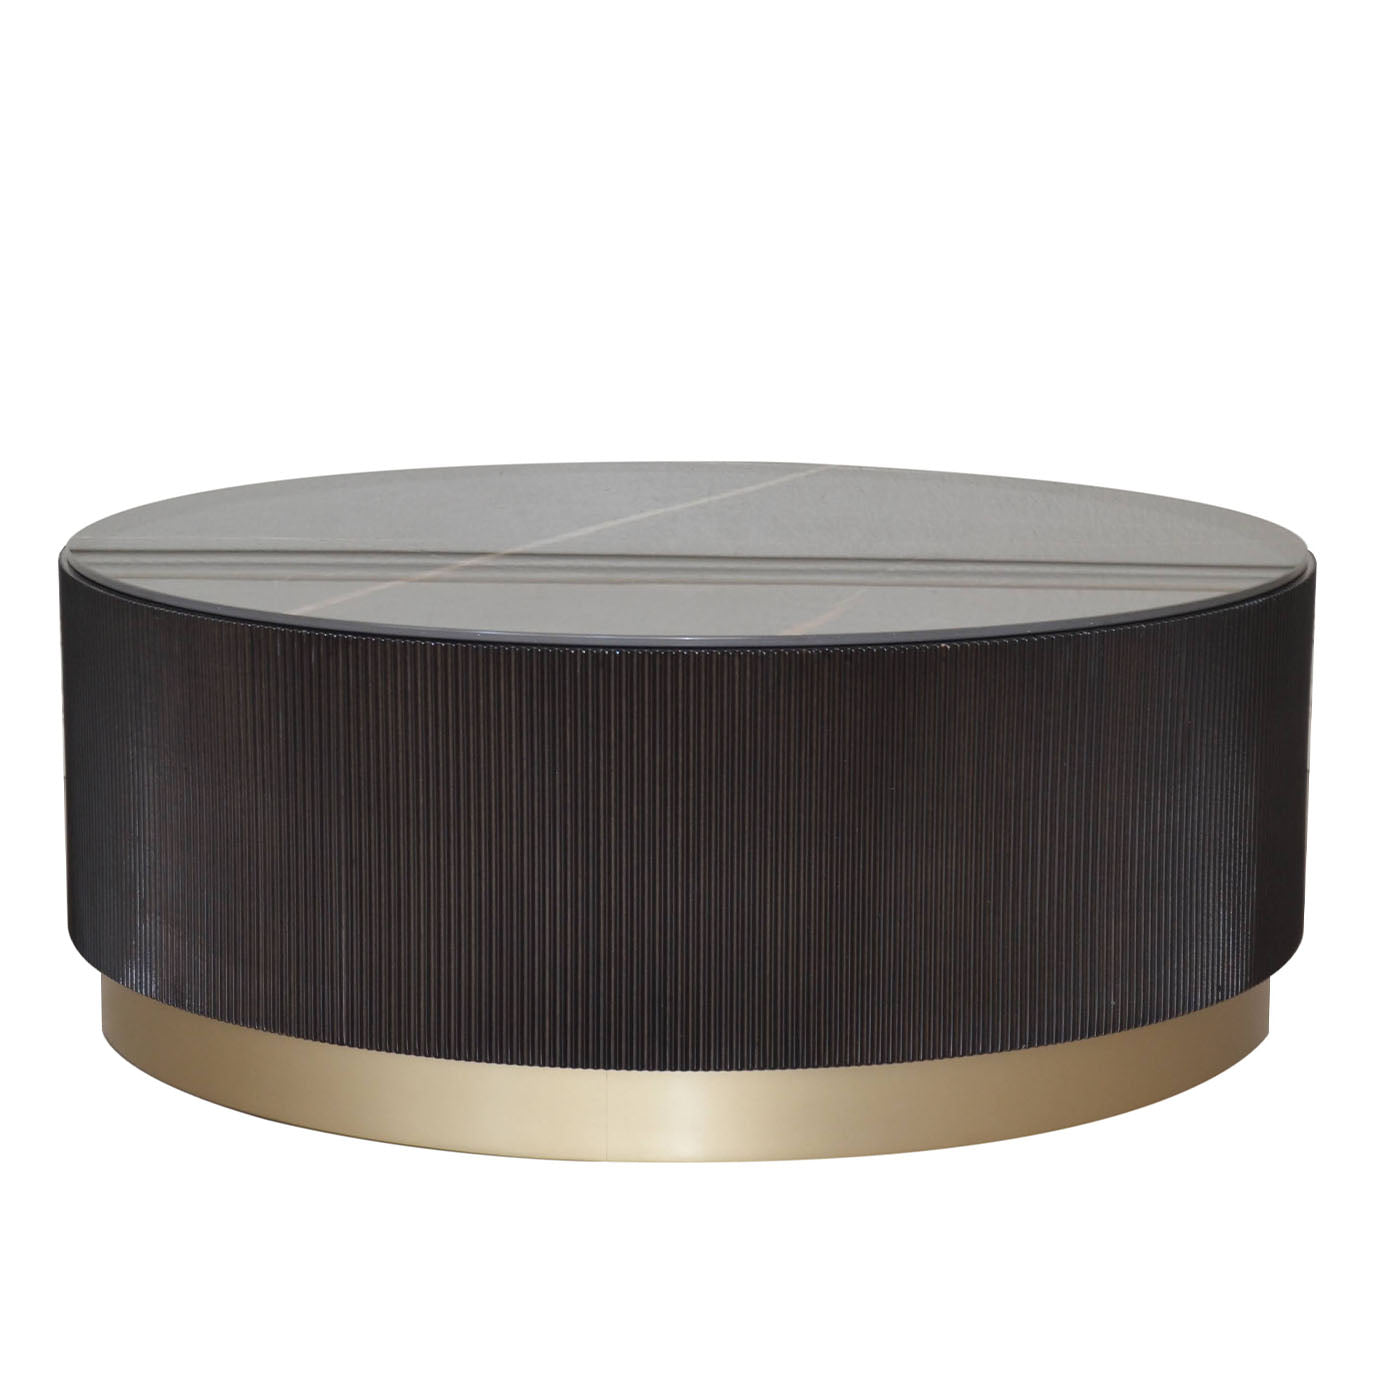 Italian Modern Round Large Coffee Table With Ceramic Top - Alternative view 1